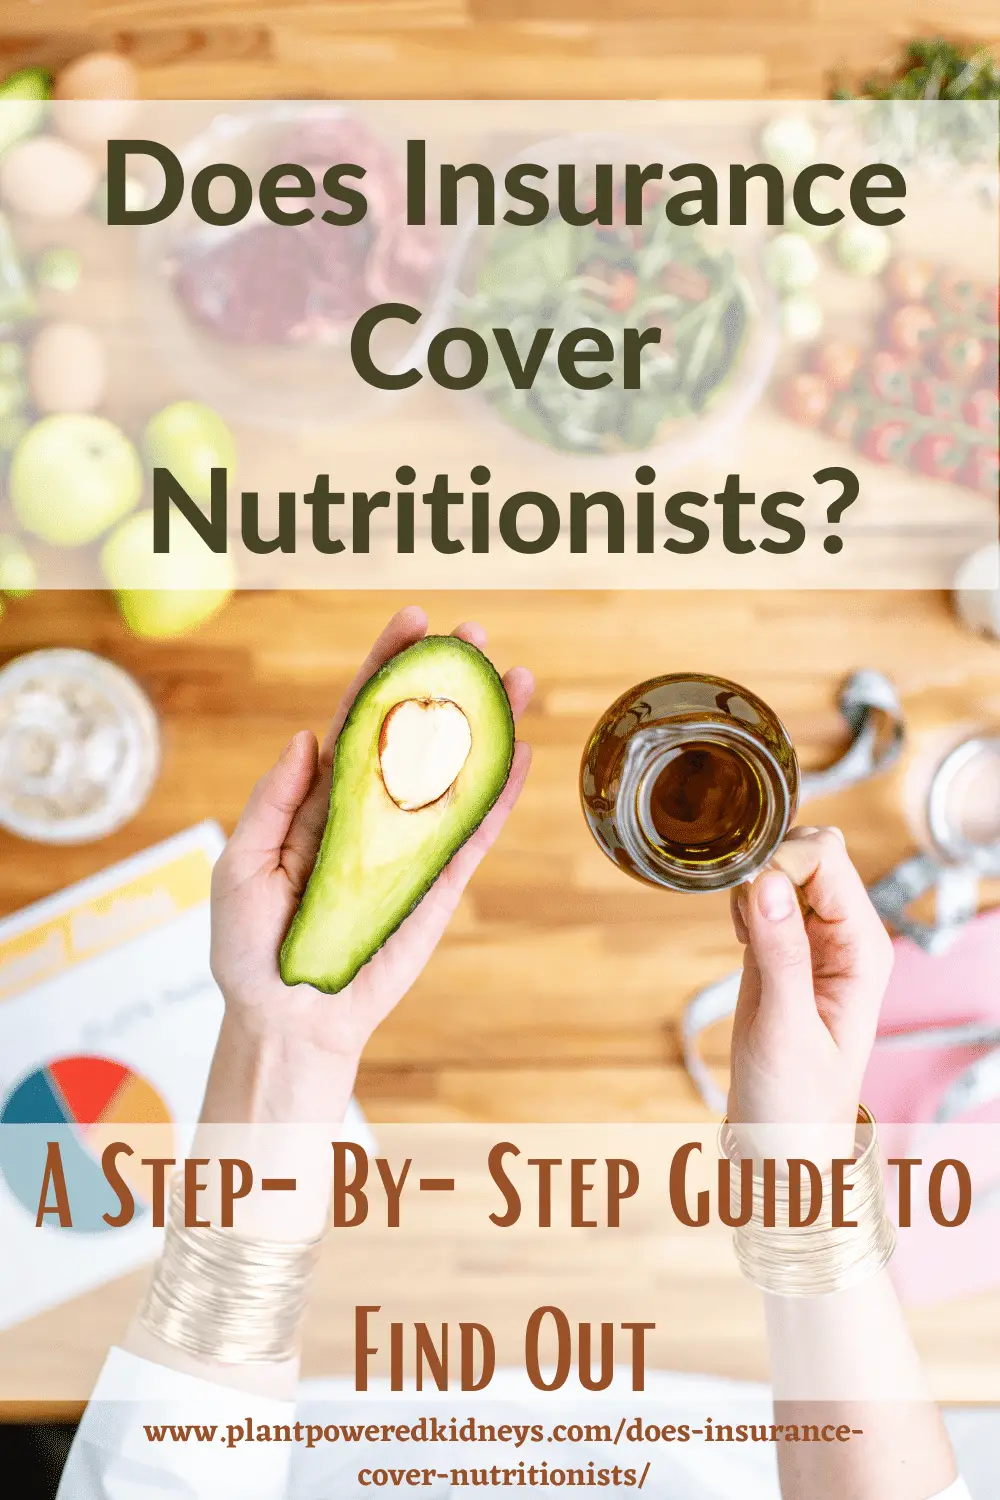 Does Insurance Cover Nutritionists? Your Step